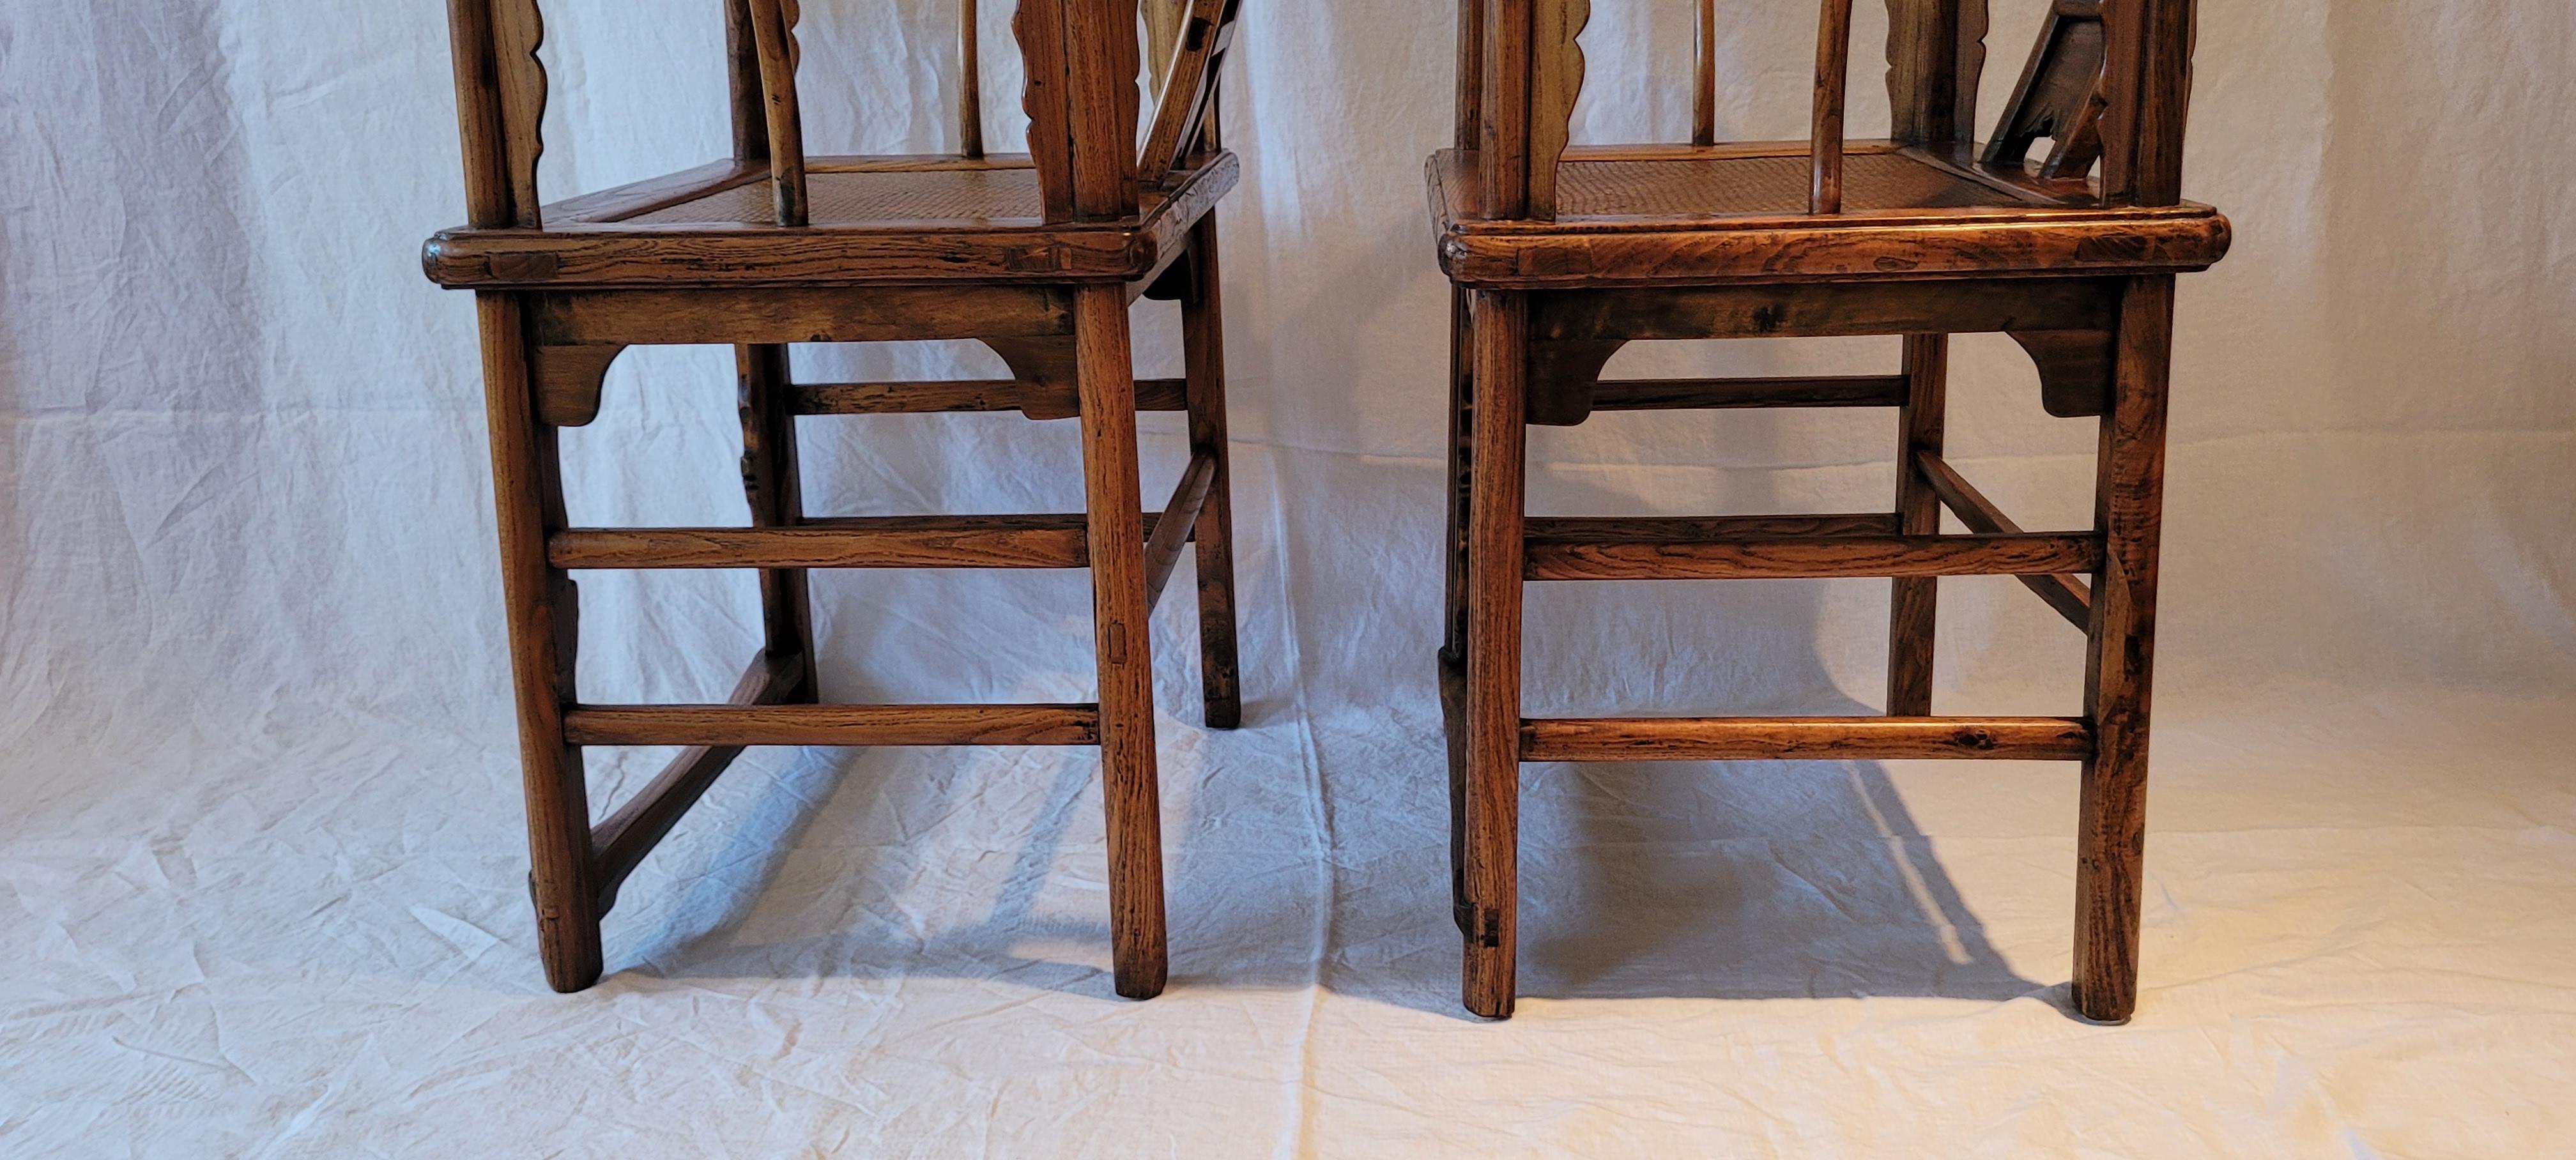 Pair of Horseshoe Back Chairs - mid 19th Century For Sale 2